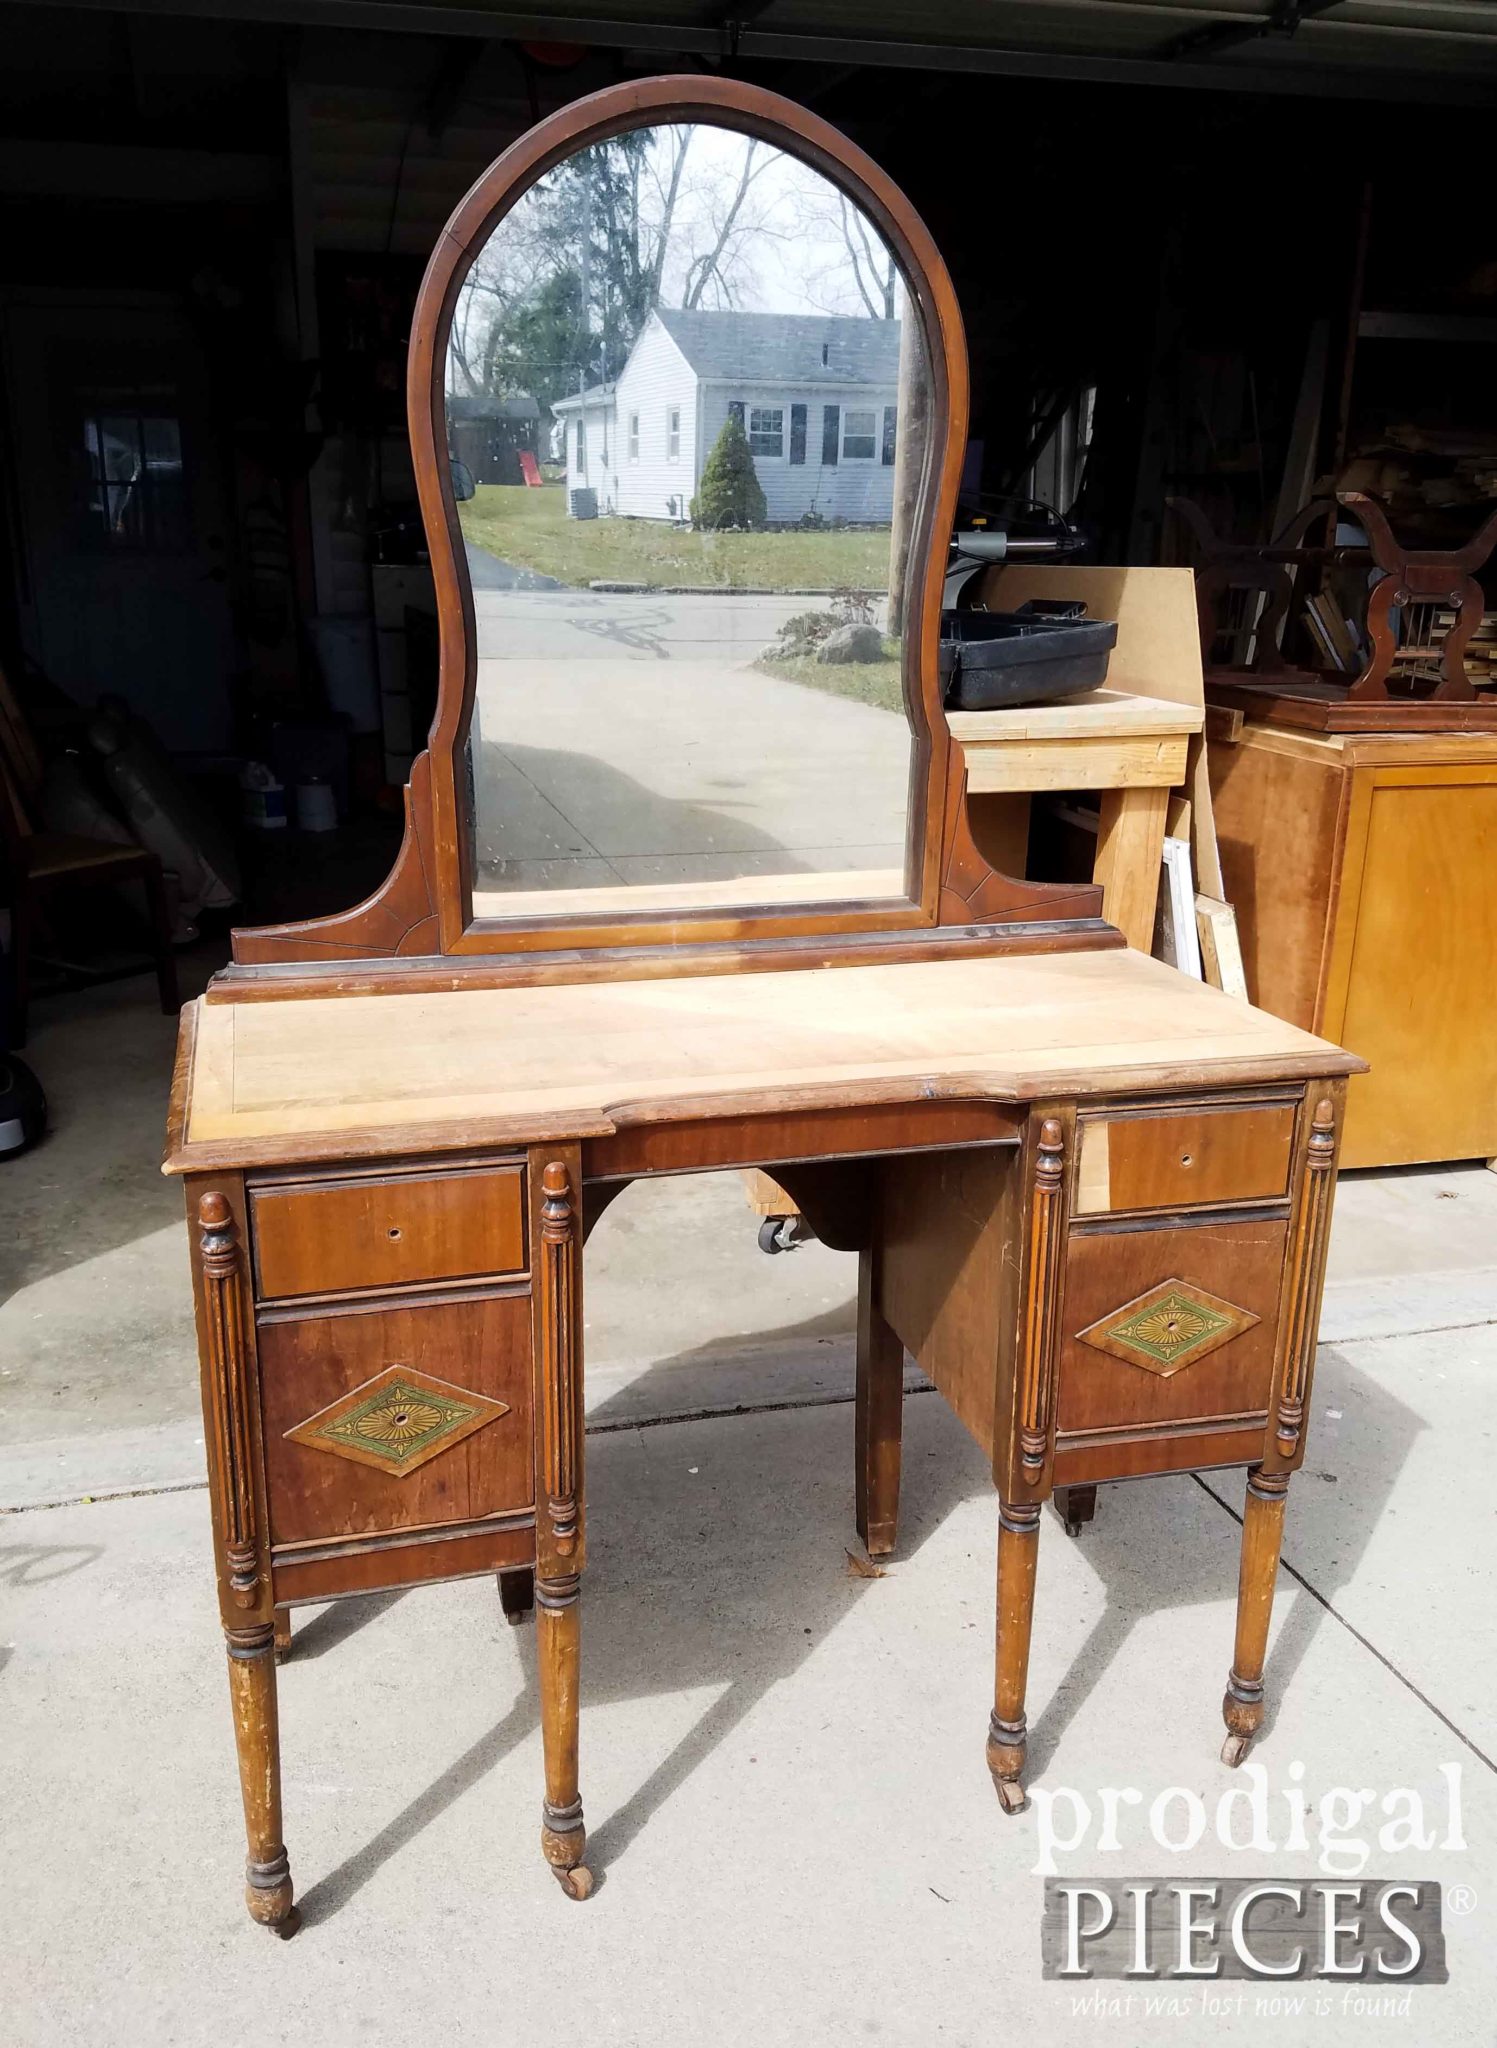 Antique Vanity Before Makeover by Larissa of Prodigal Pieces | prodigalpieces.com